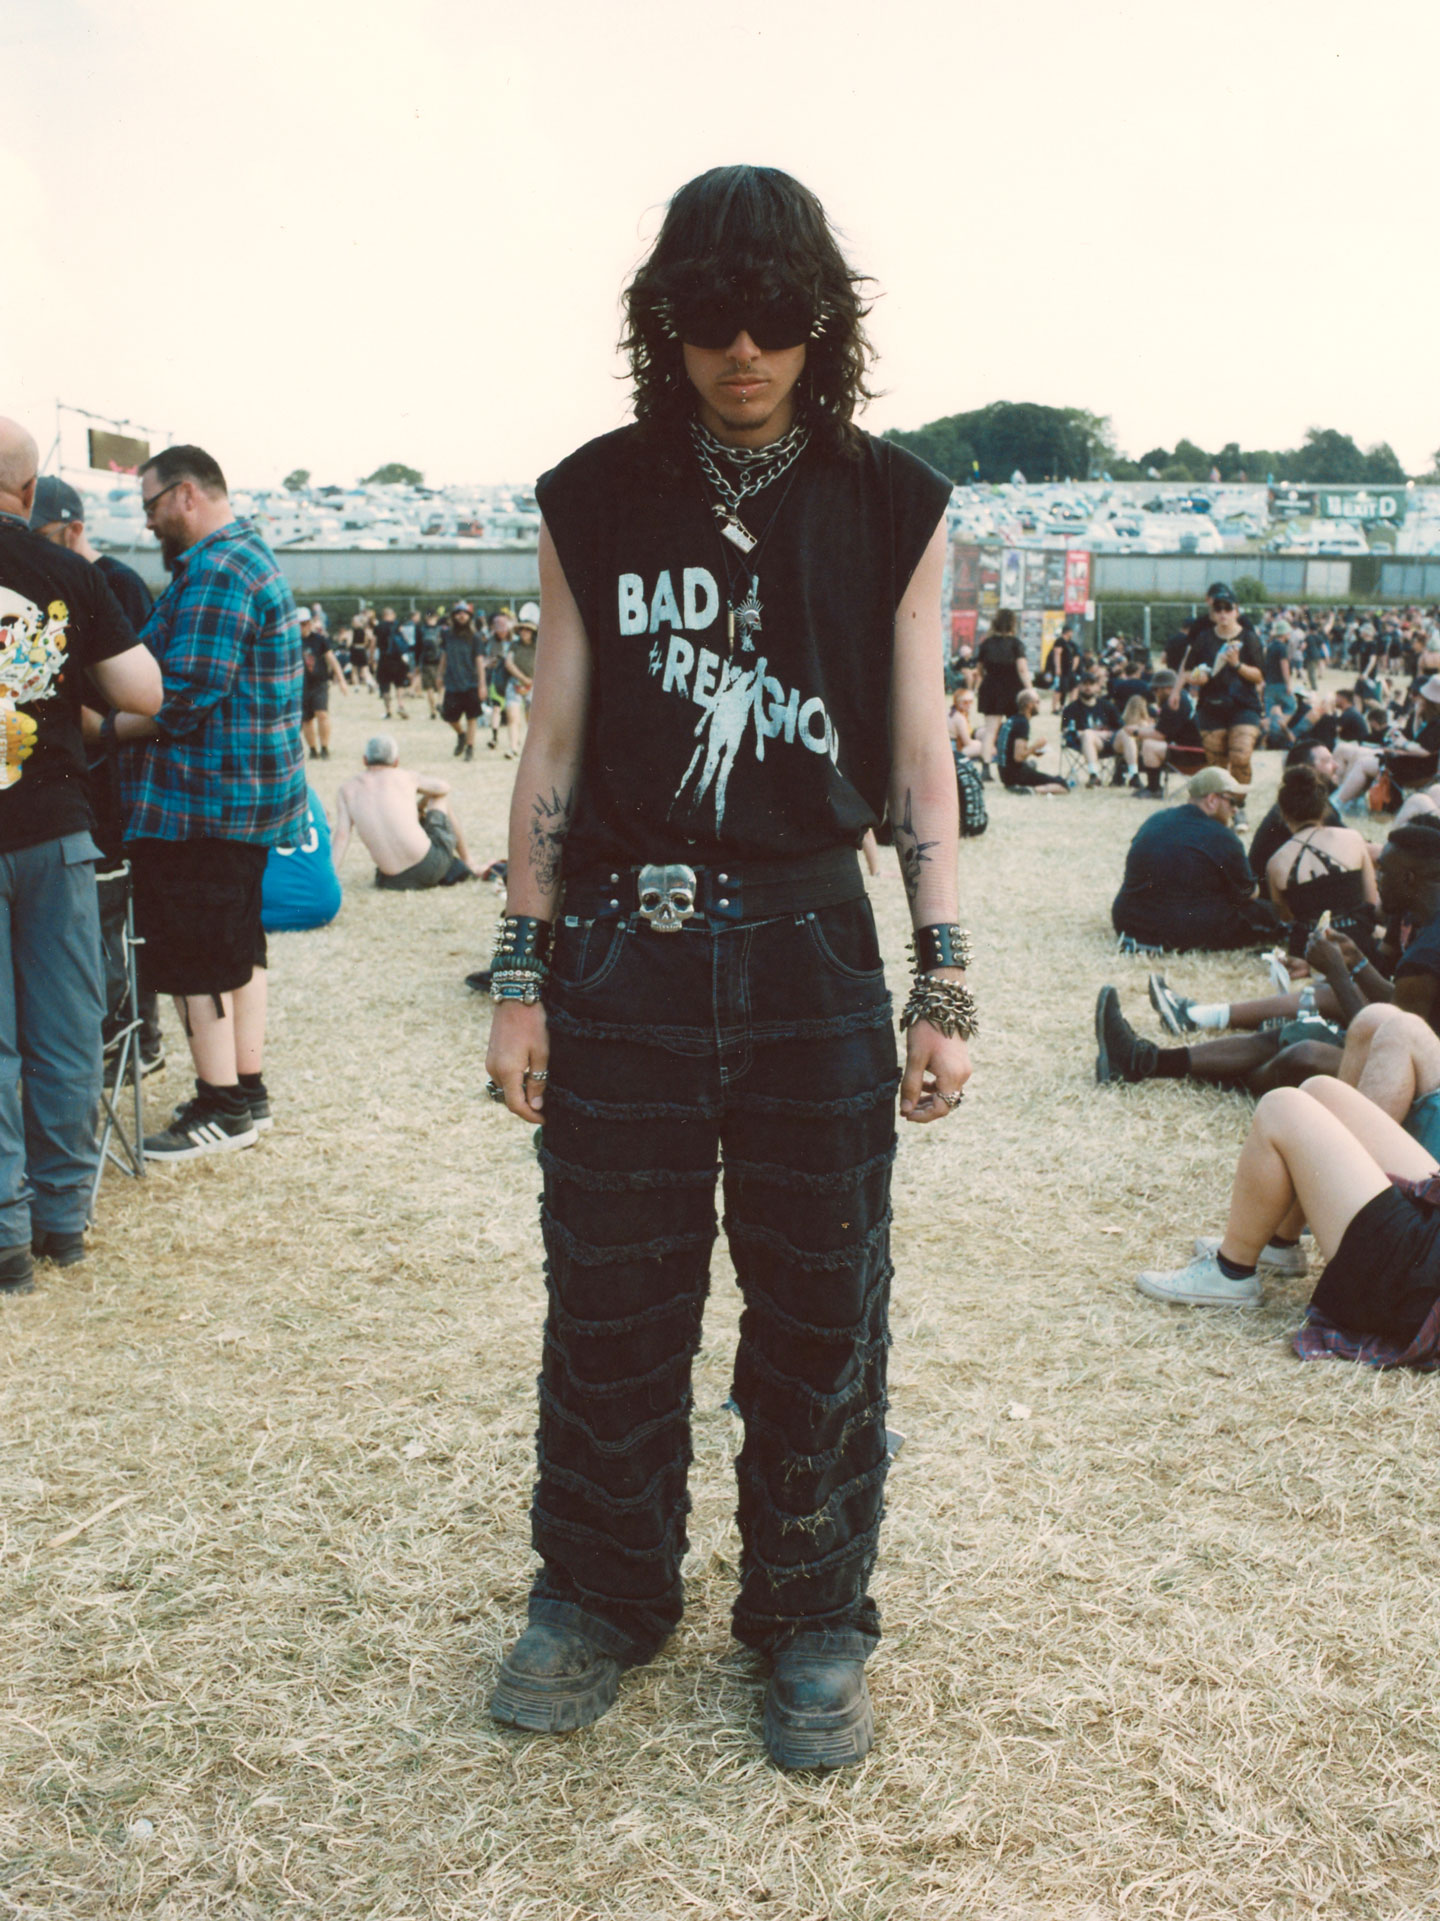 a young man with a shag haircut and a bad religion tank wears chain jewellery around his neck and wrists, plus a skill belt buckle